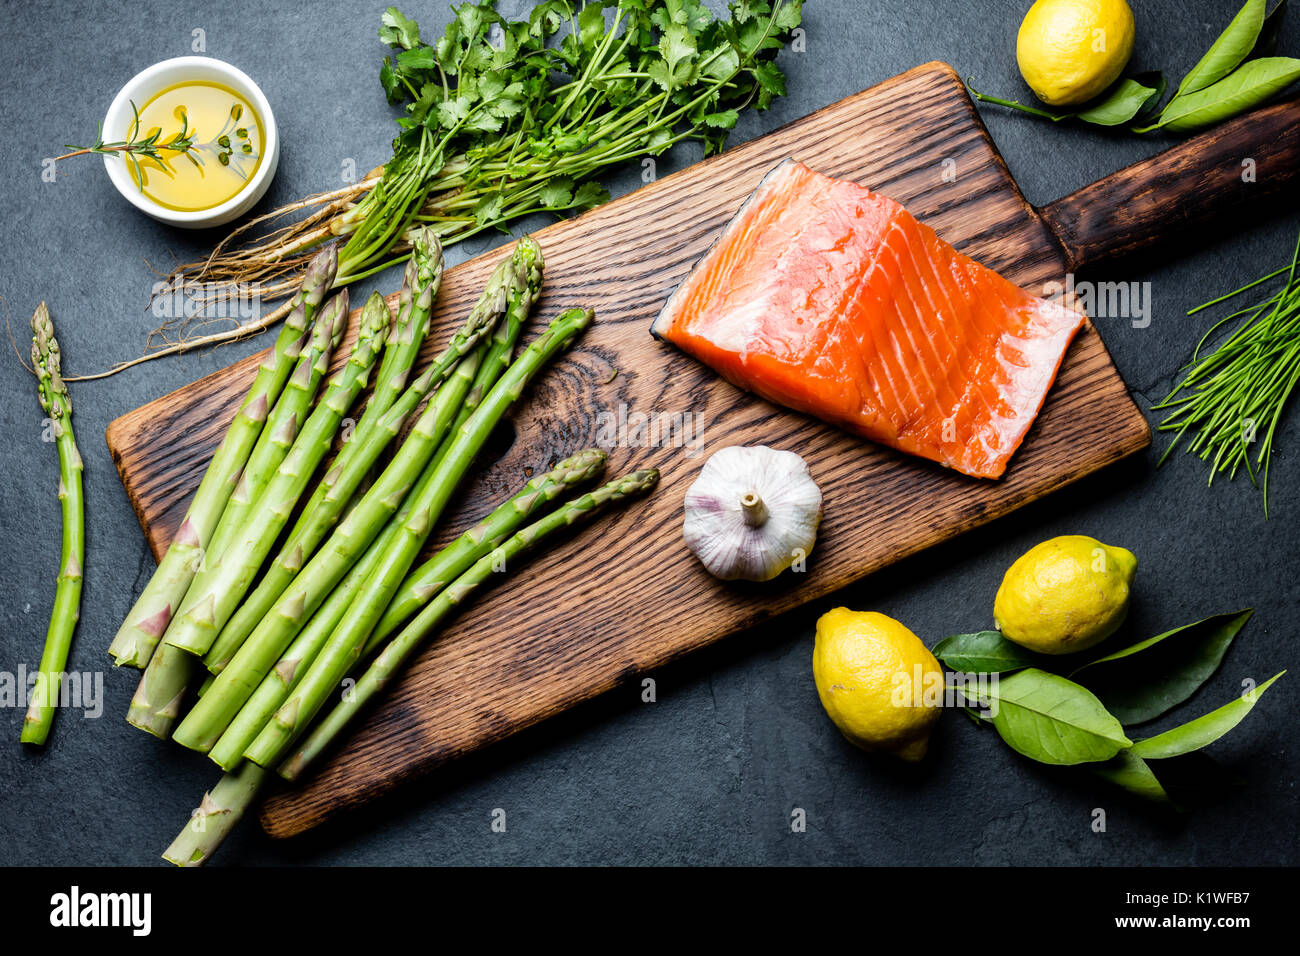 Ingredients for cooking. Raw salmon fillet, asparagus and herbs on wooden board. Food cooking background with copy space. Top view Stock Photo